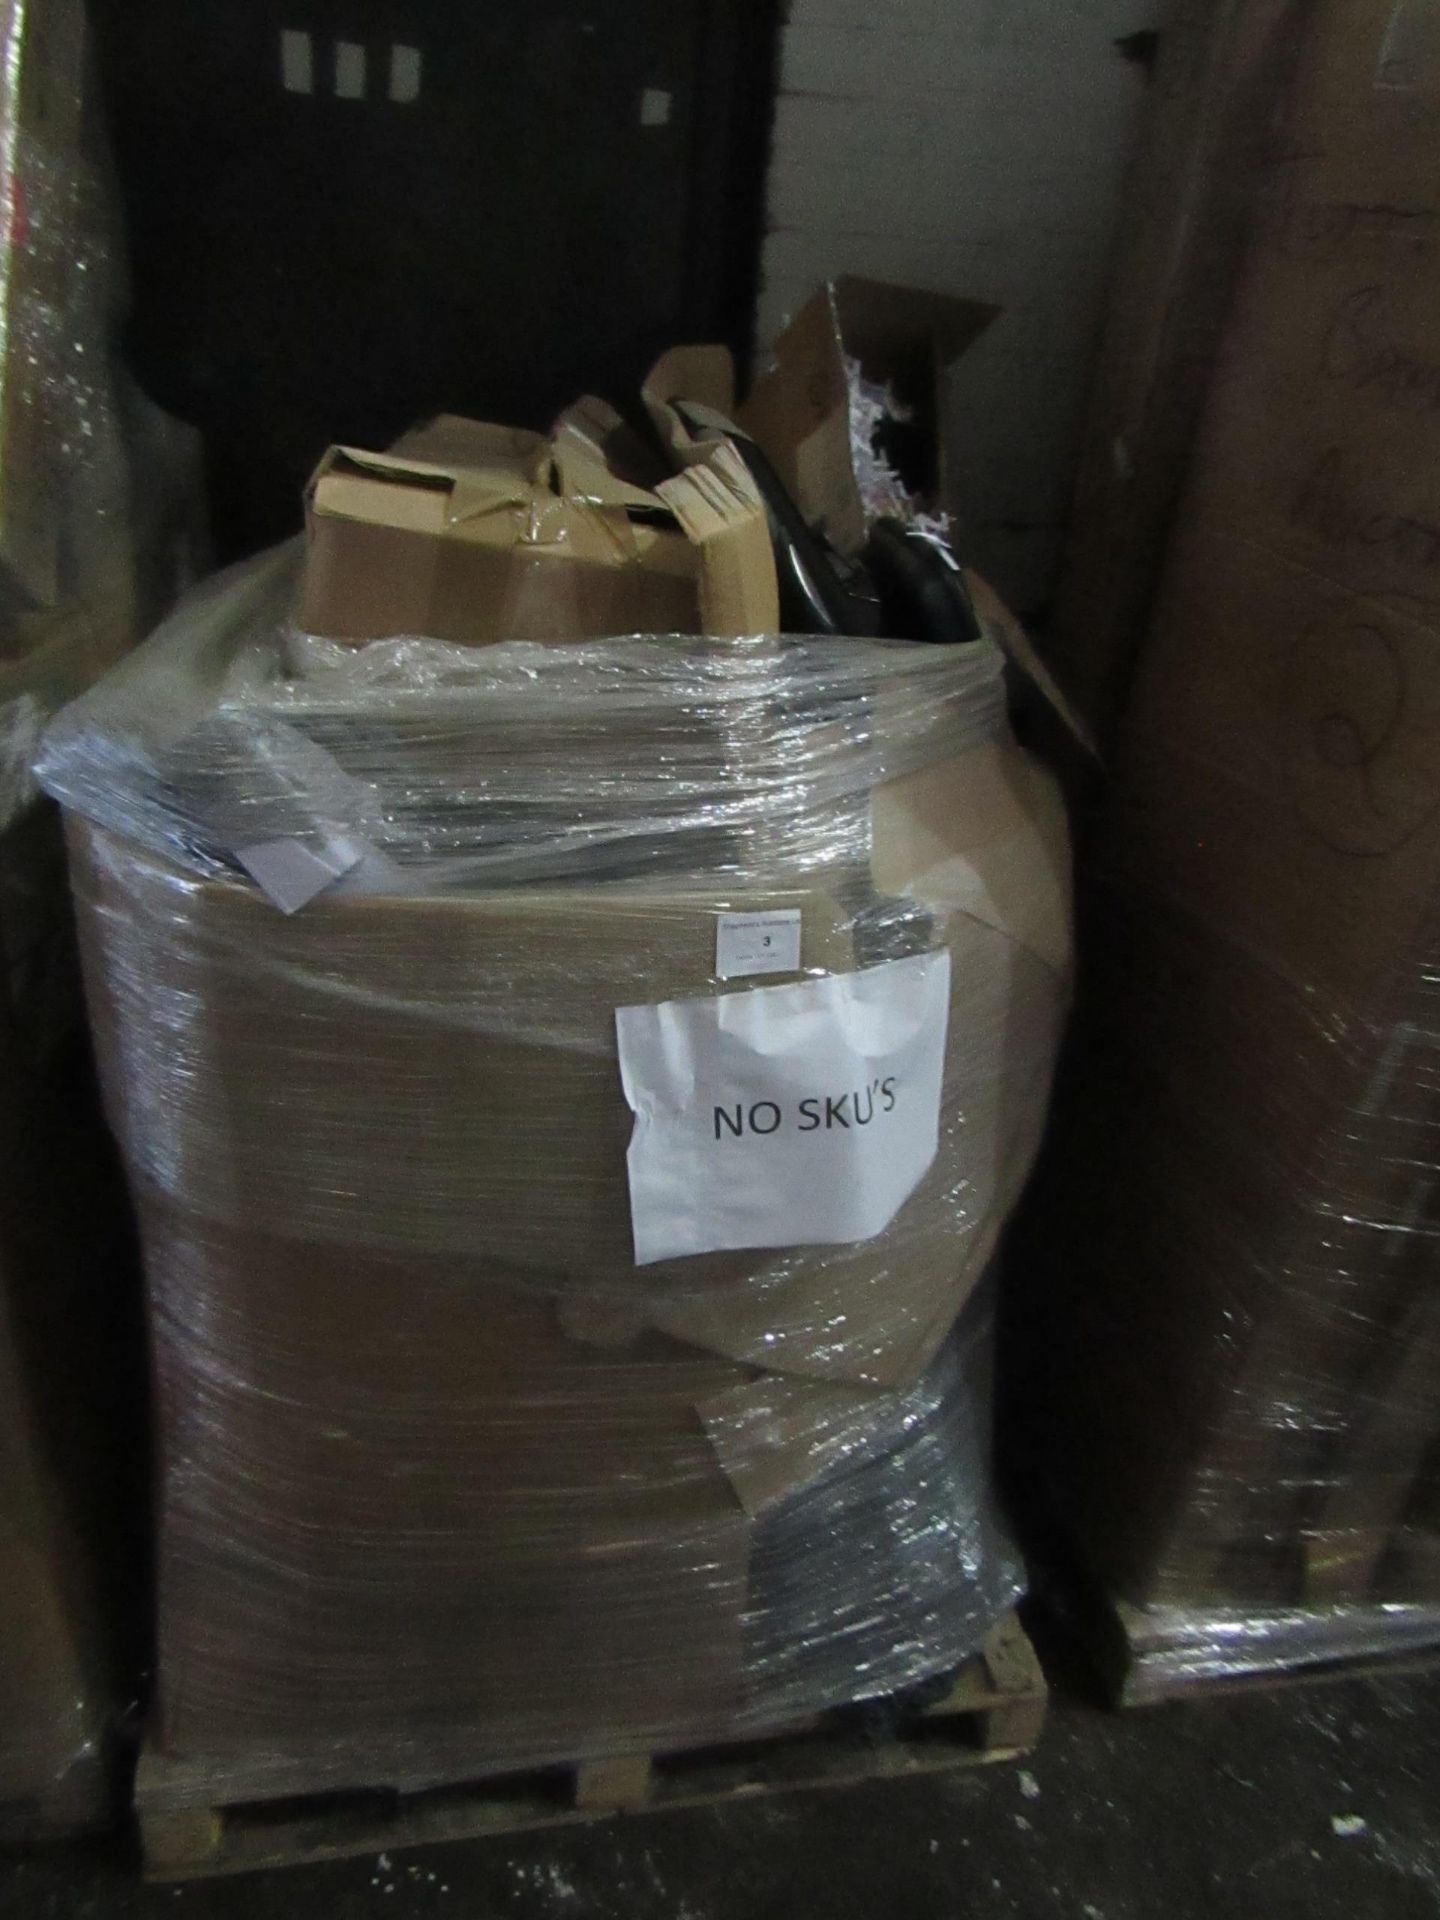 Pallet of Mixed Electrical and non electrical returns from a large online retailer, includes clothes